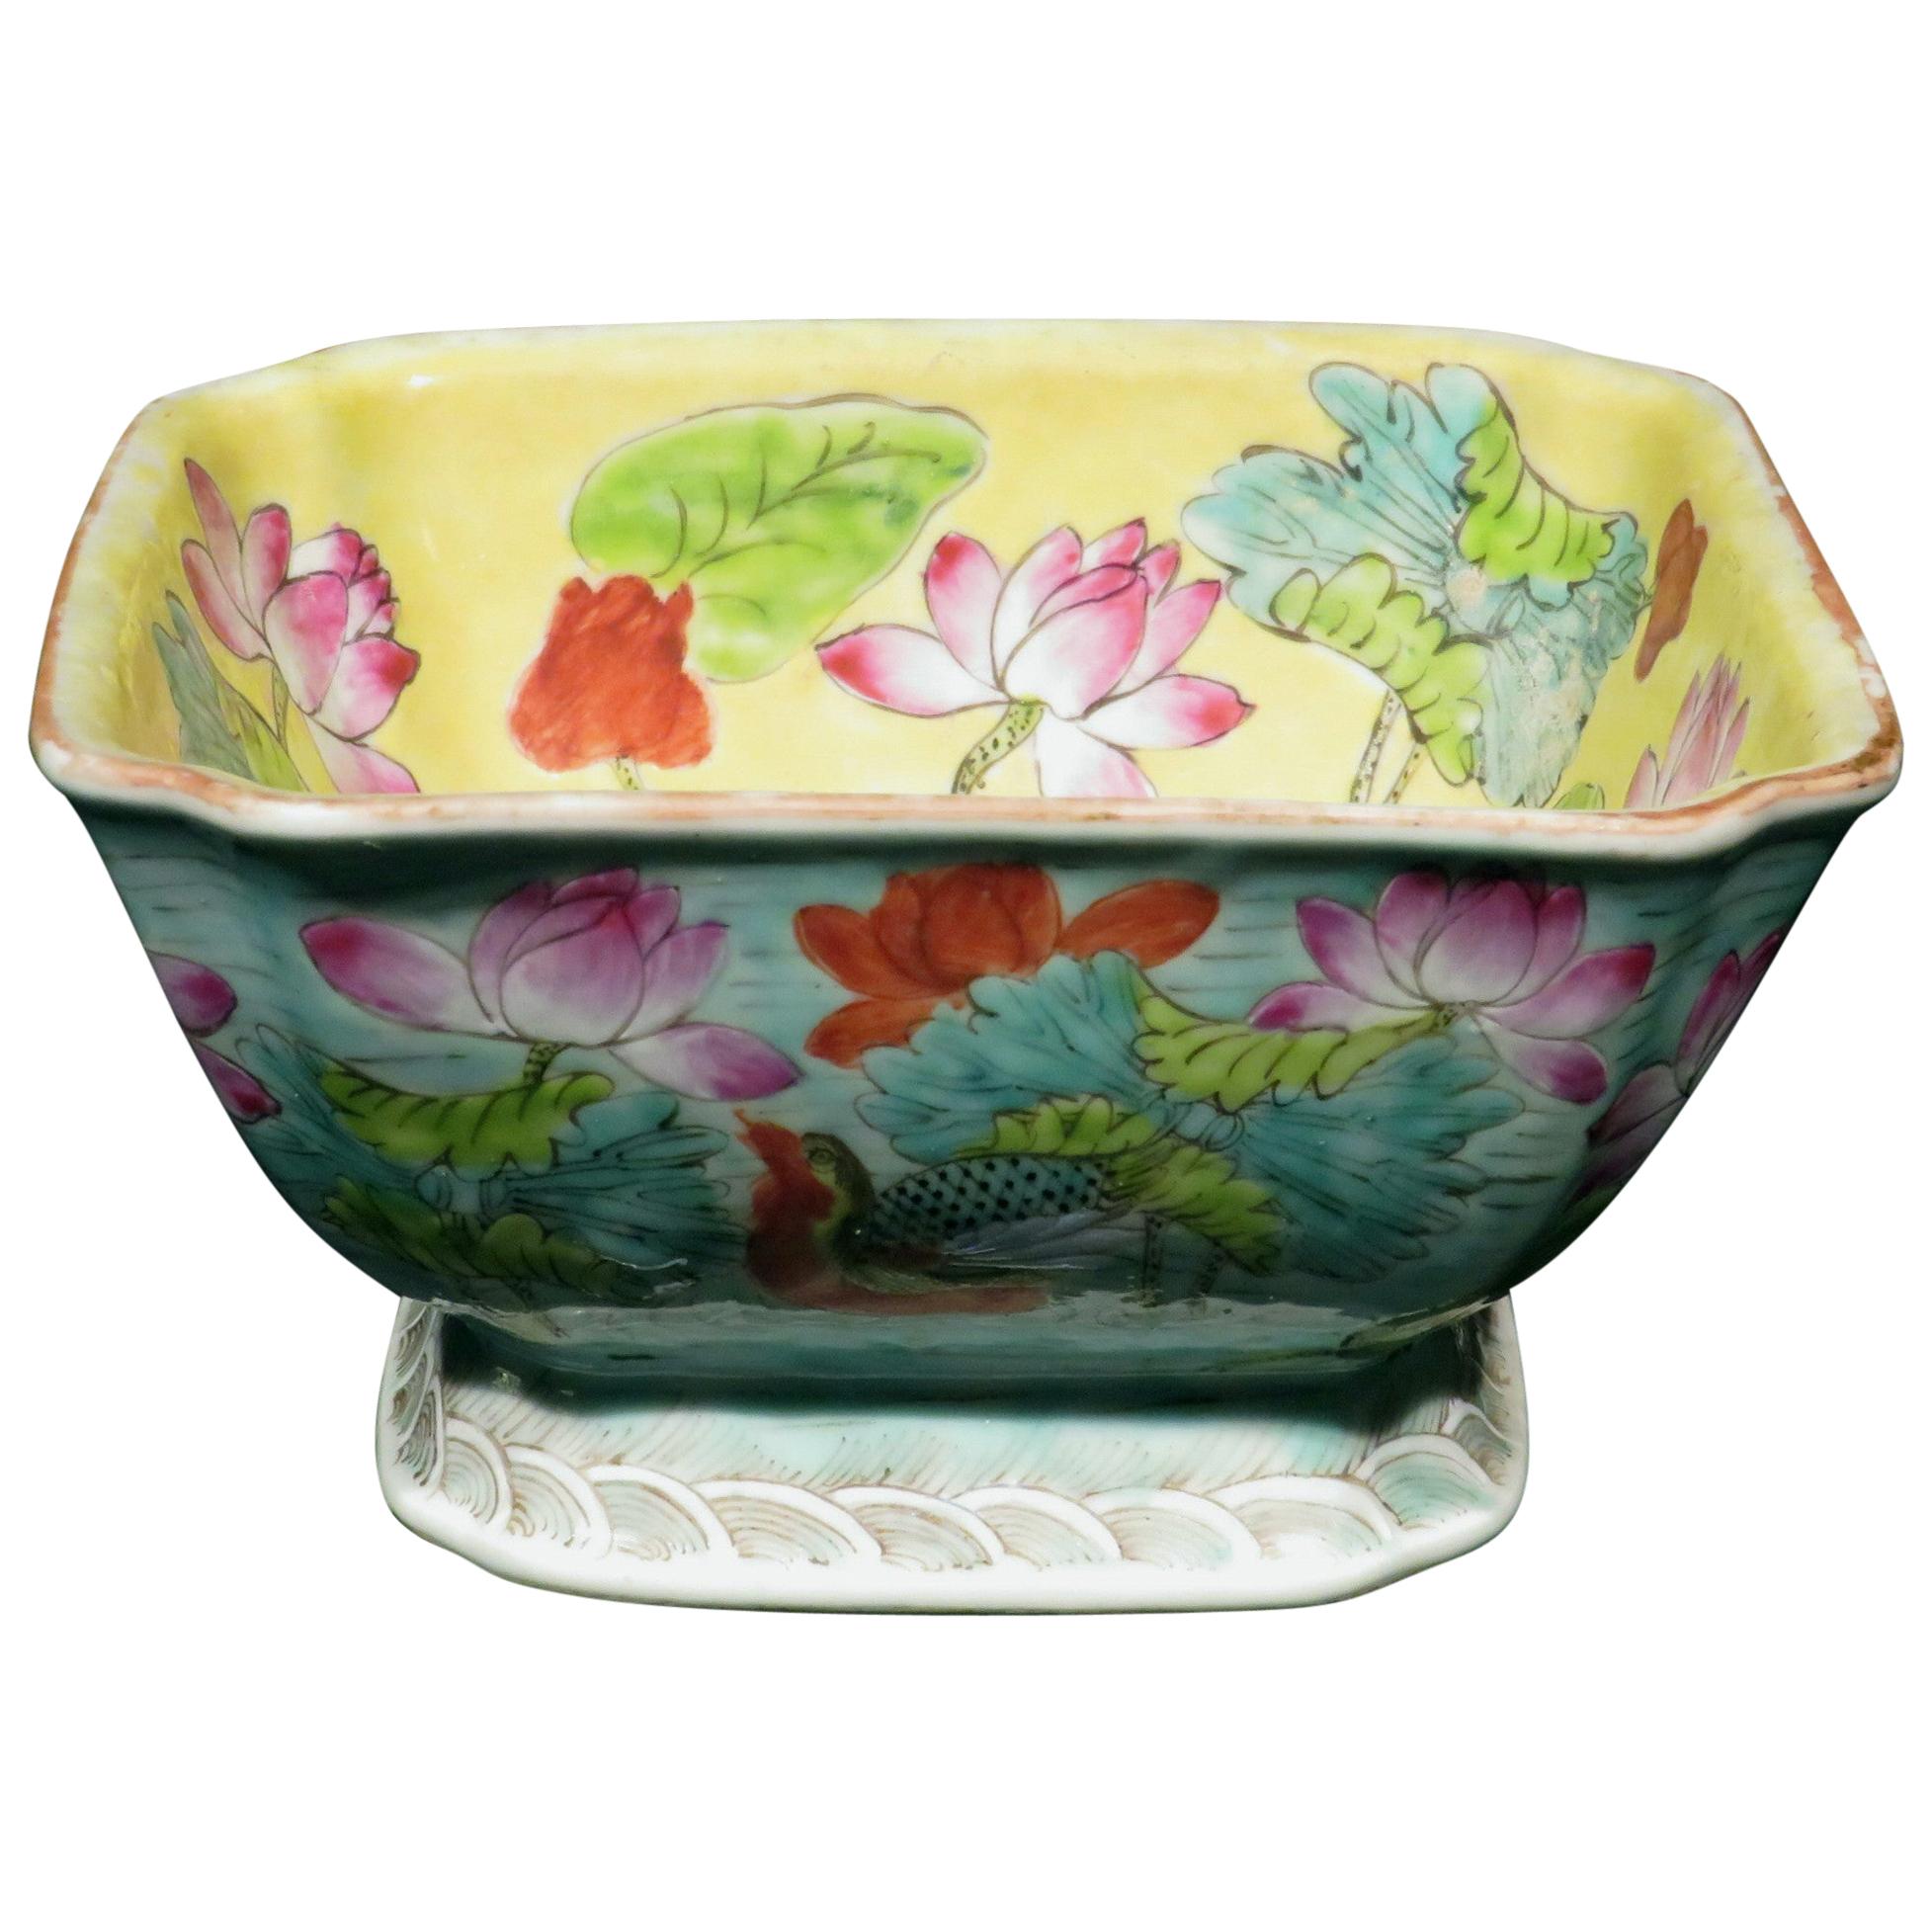 A Chinese Export Enamelled Porcelain Bowl, Qing Period Circa 1900